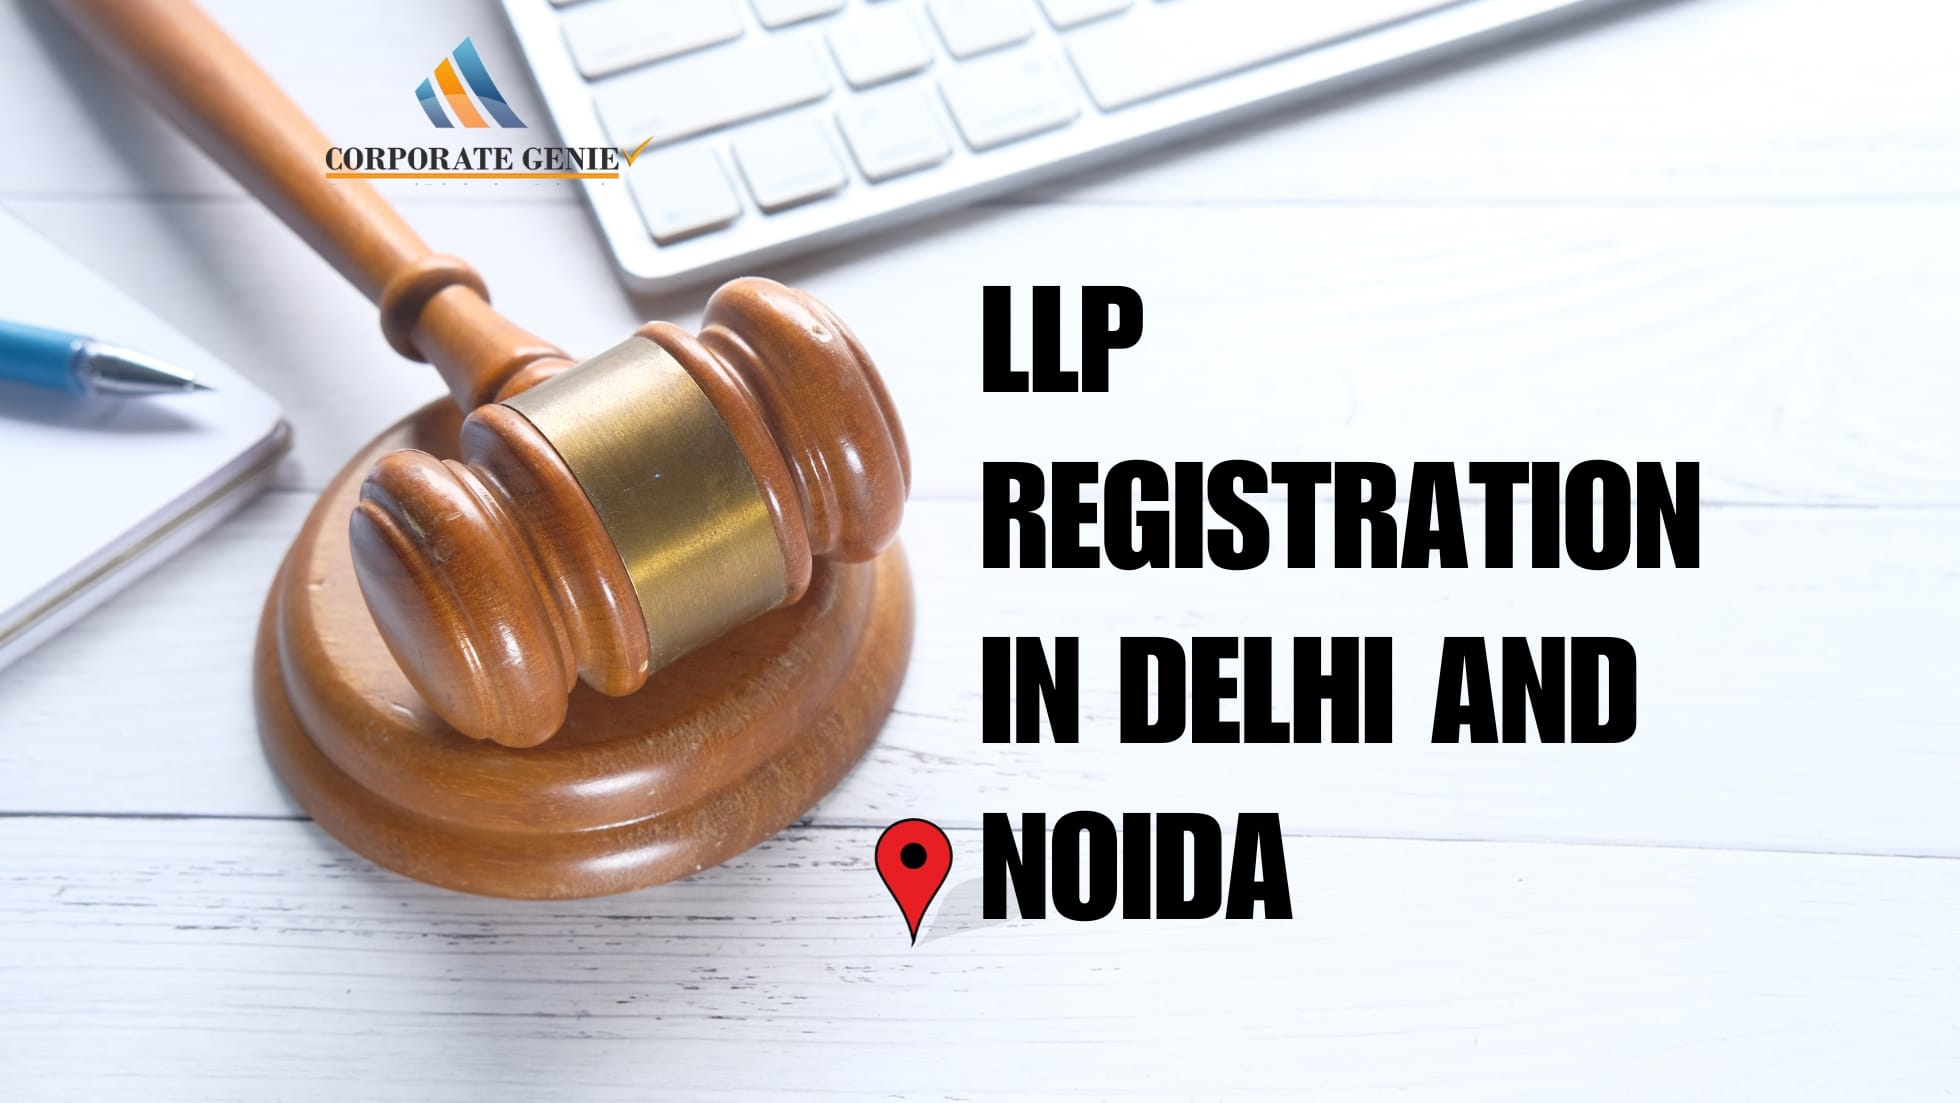 llp registration process and details